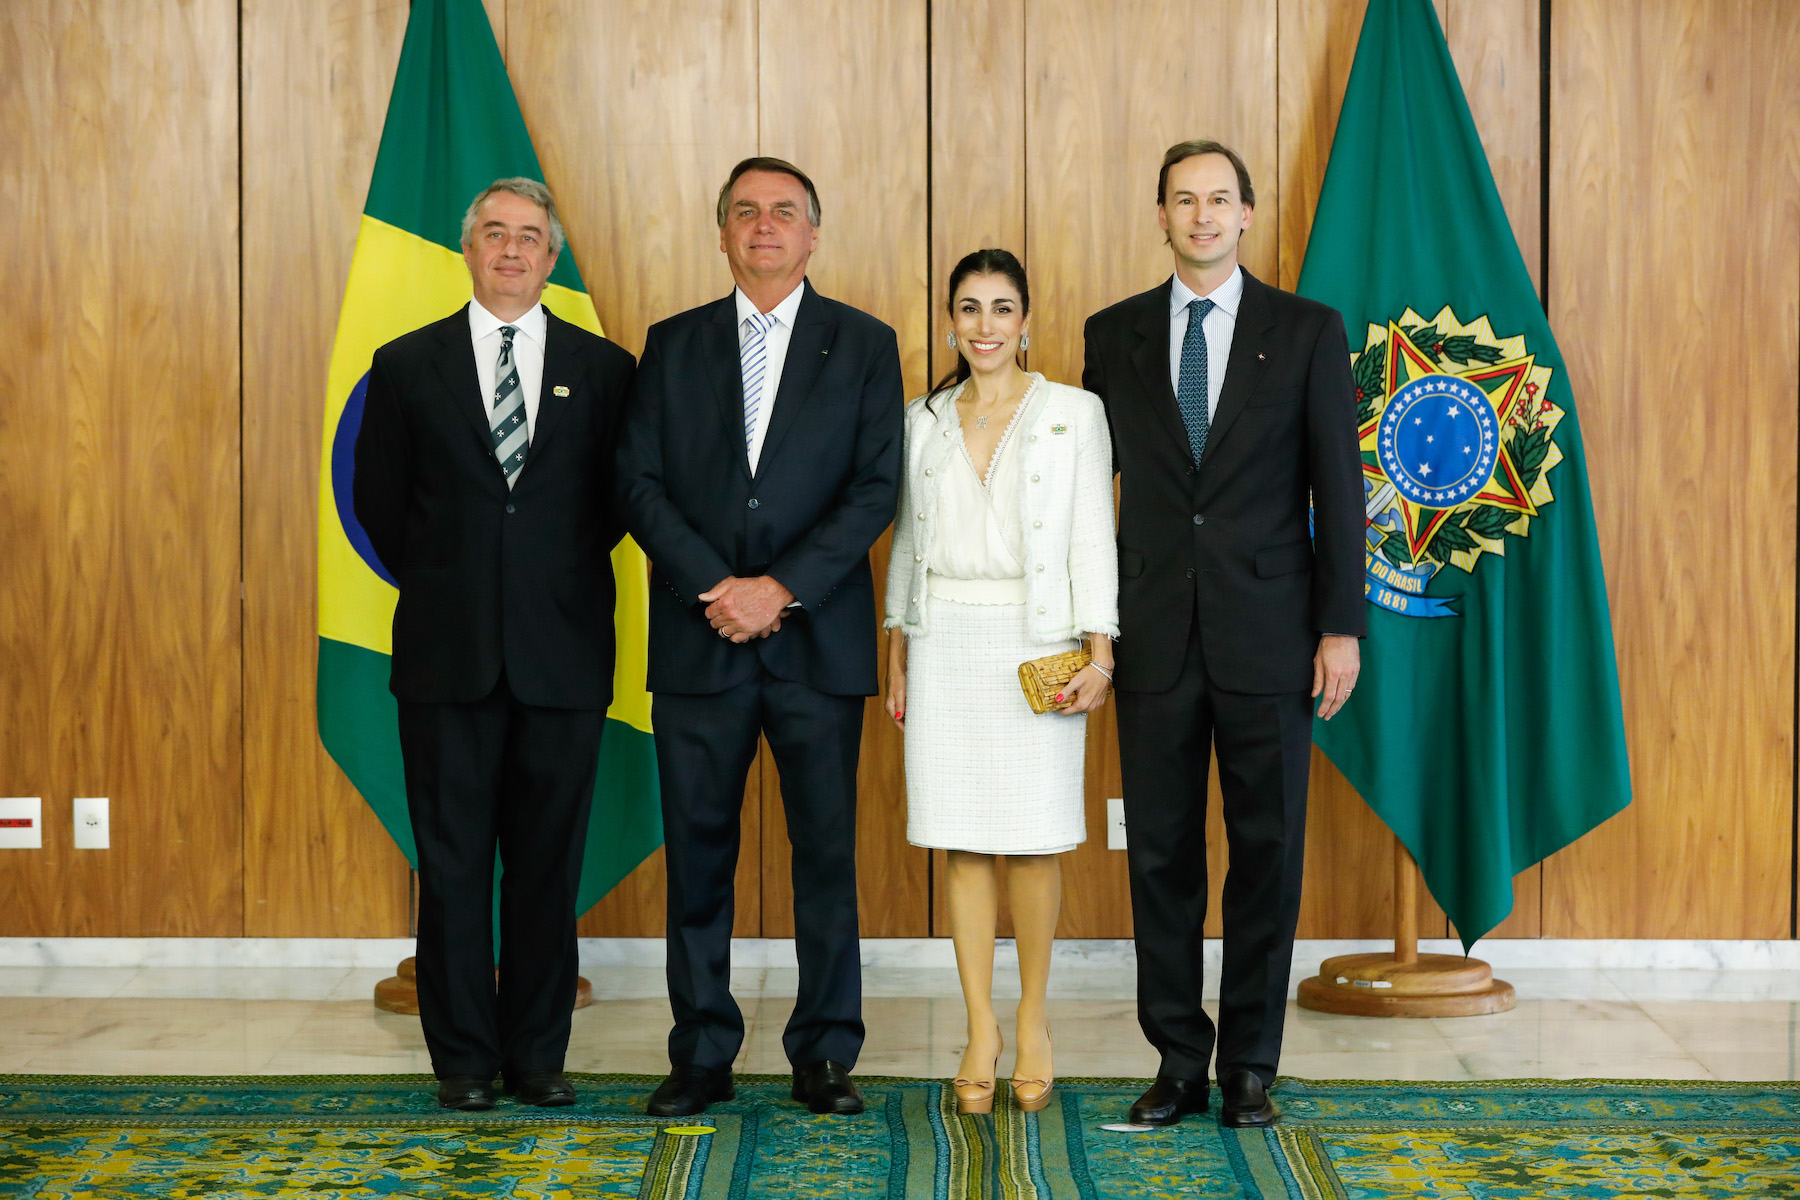 The Ambassador of the Sovereign Order of Malta to the Federative Republic of Brazil presents his letters of credence